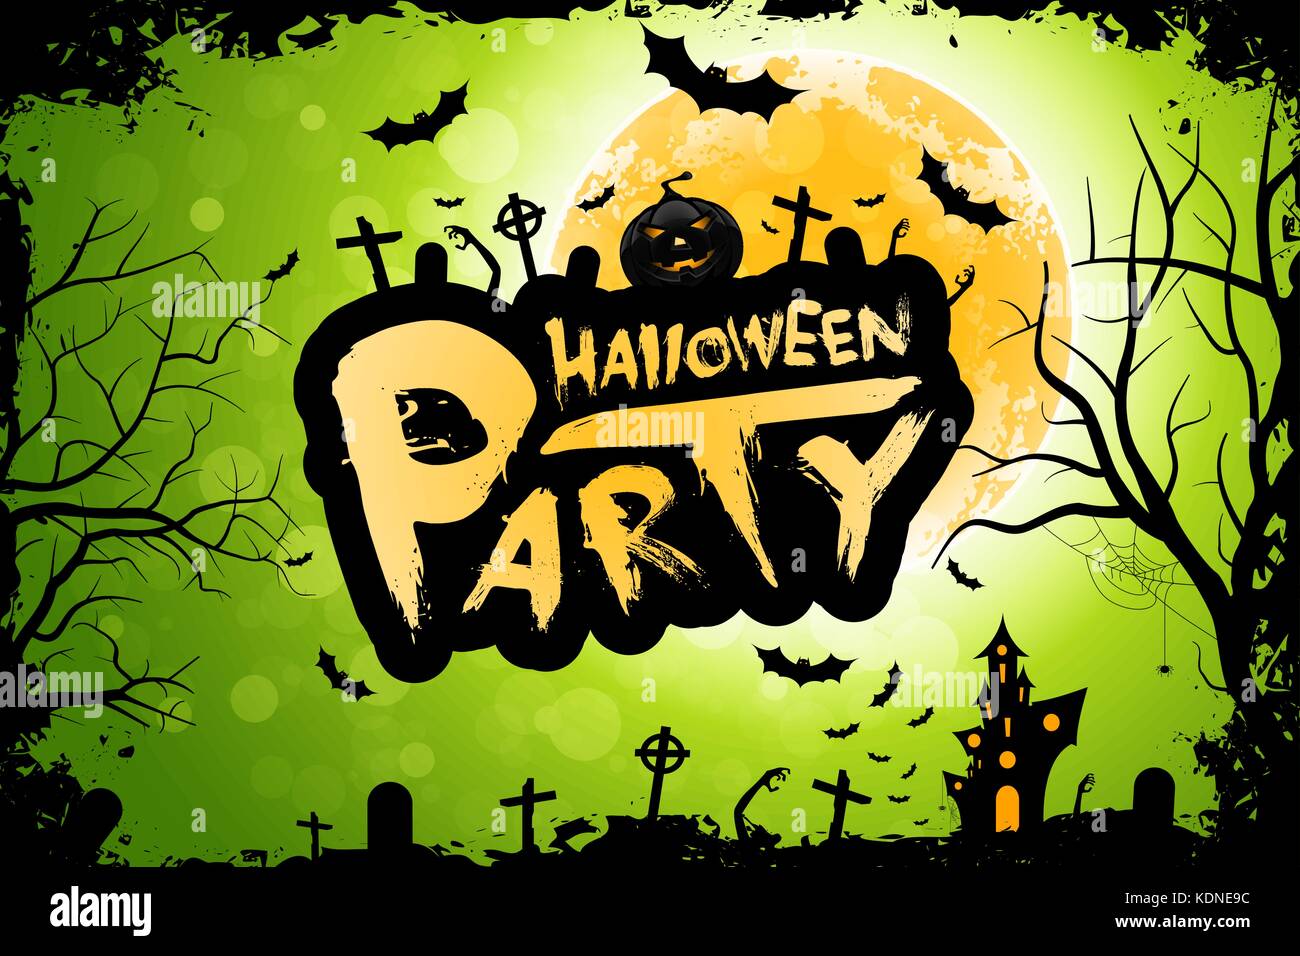 Scary poster Stock Vector Images - Alamy